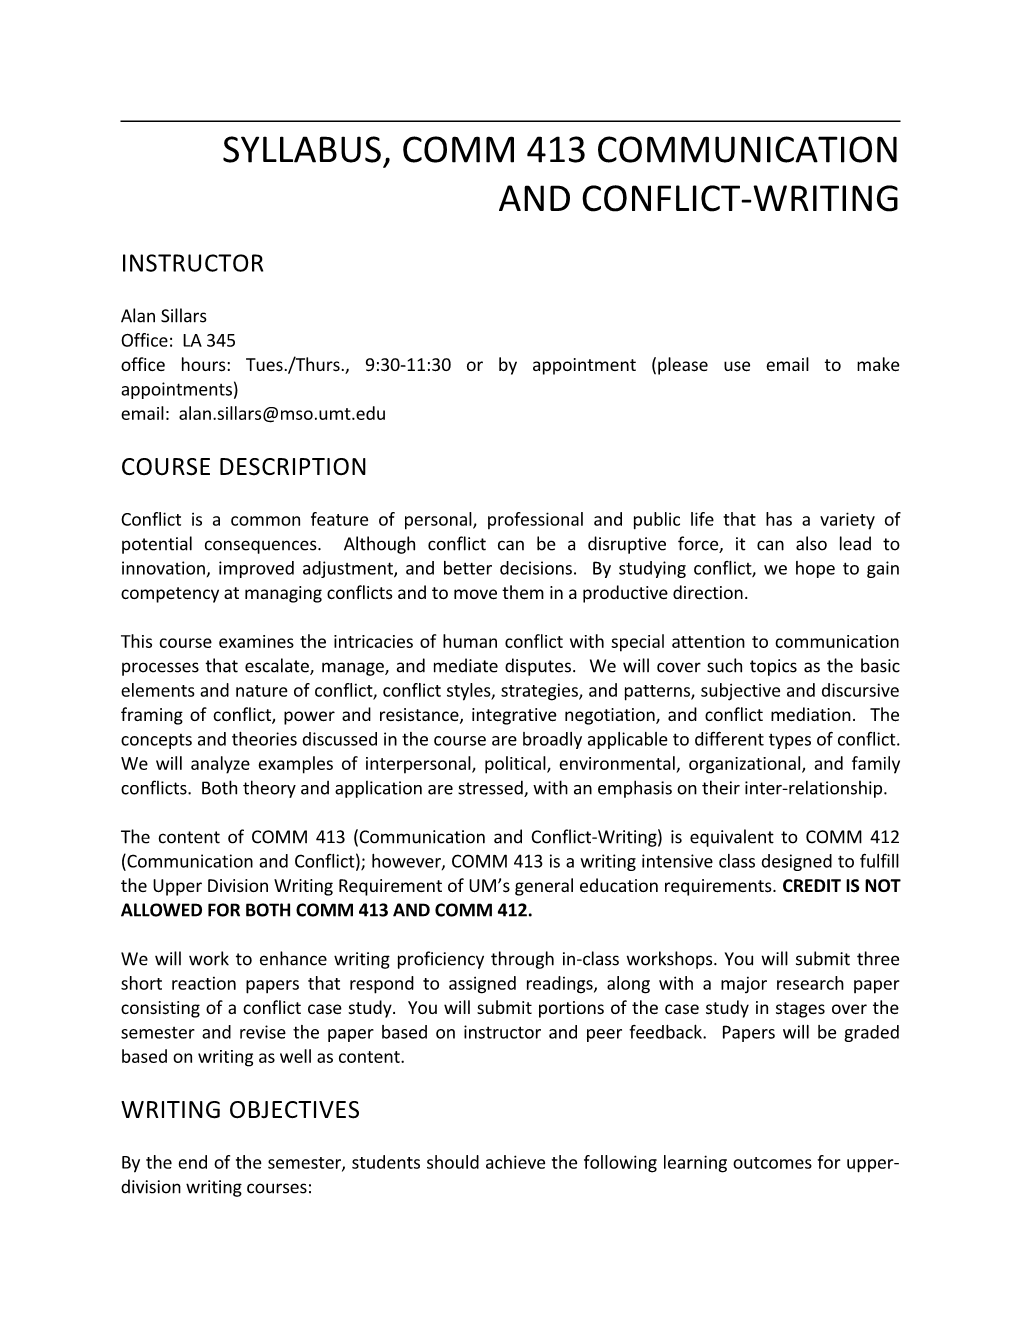 Syllabus, Comm 413Communication and Conflict-Writing